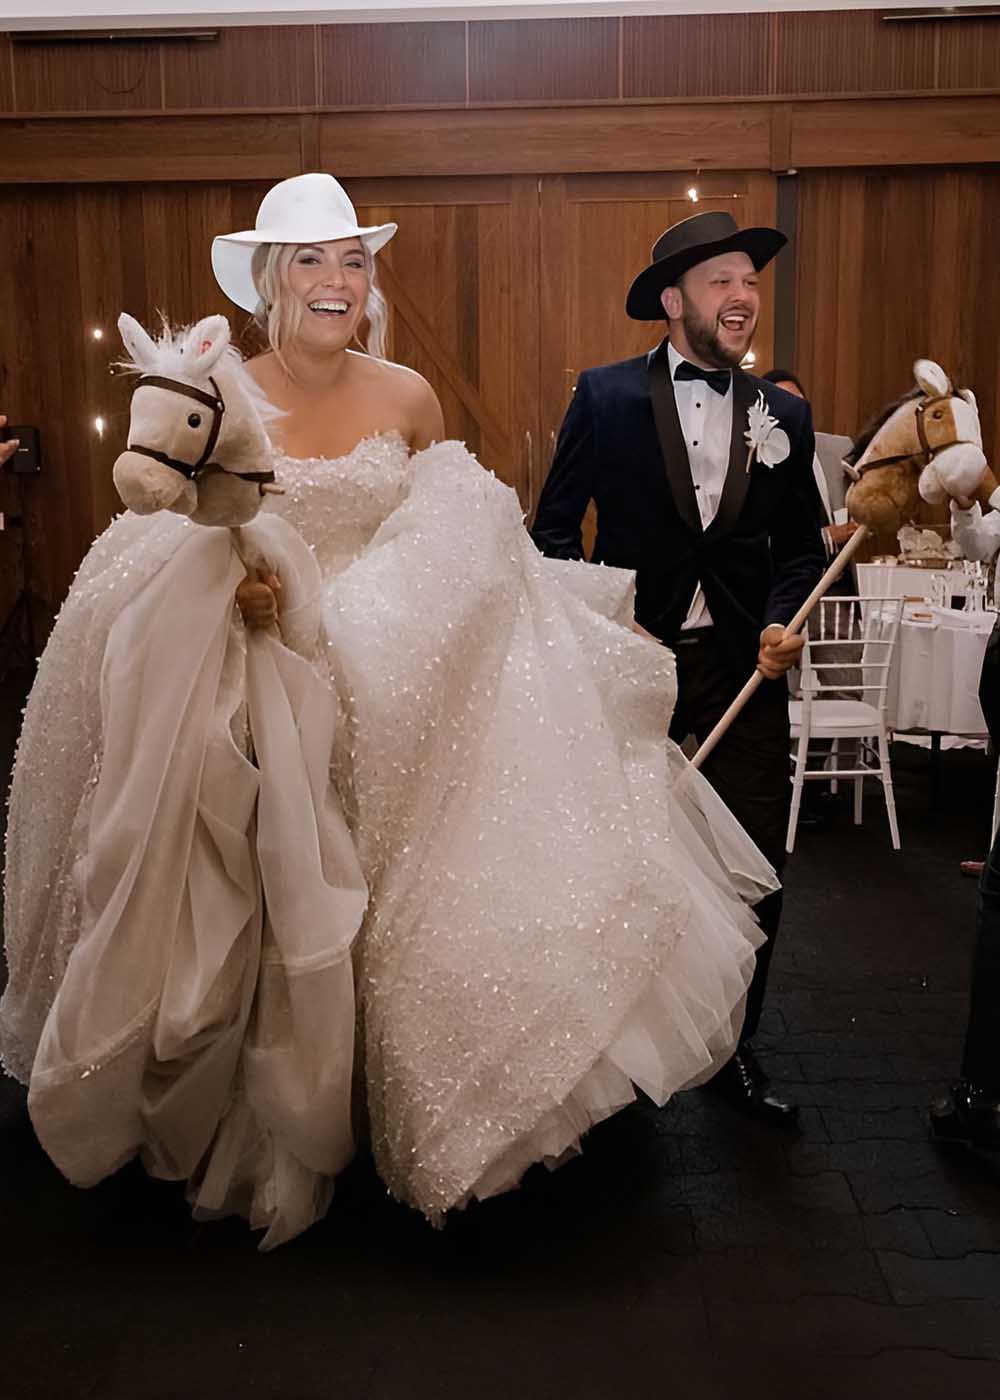 Couple making their entry into the wedding reception on stick horses